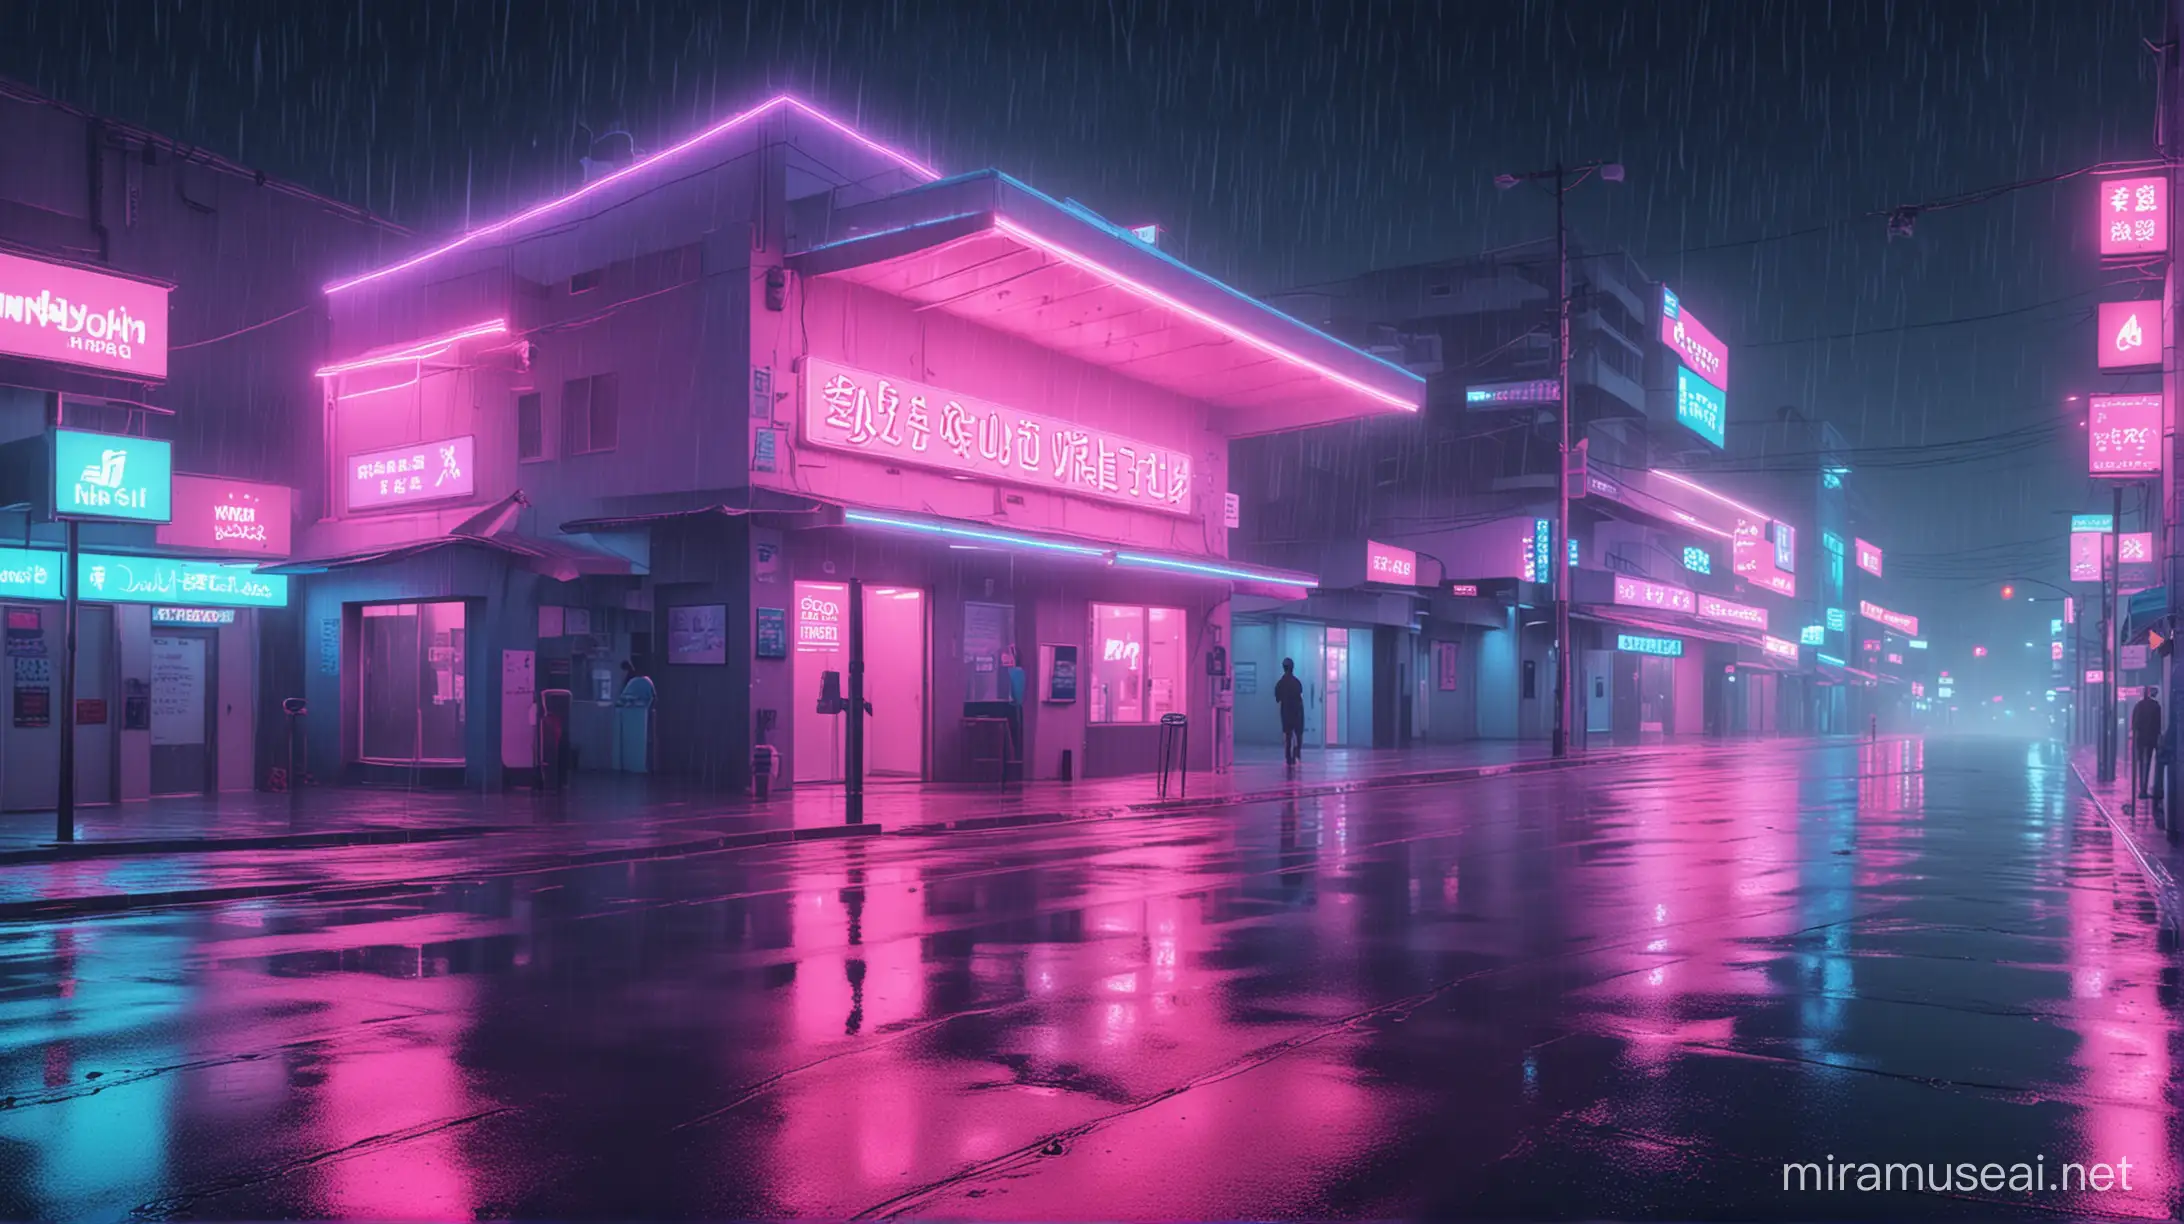 Vaporwave style. Neon city at night under the rain. Pink and blue colors.